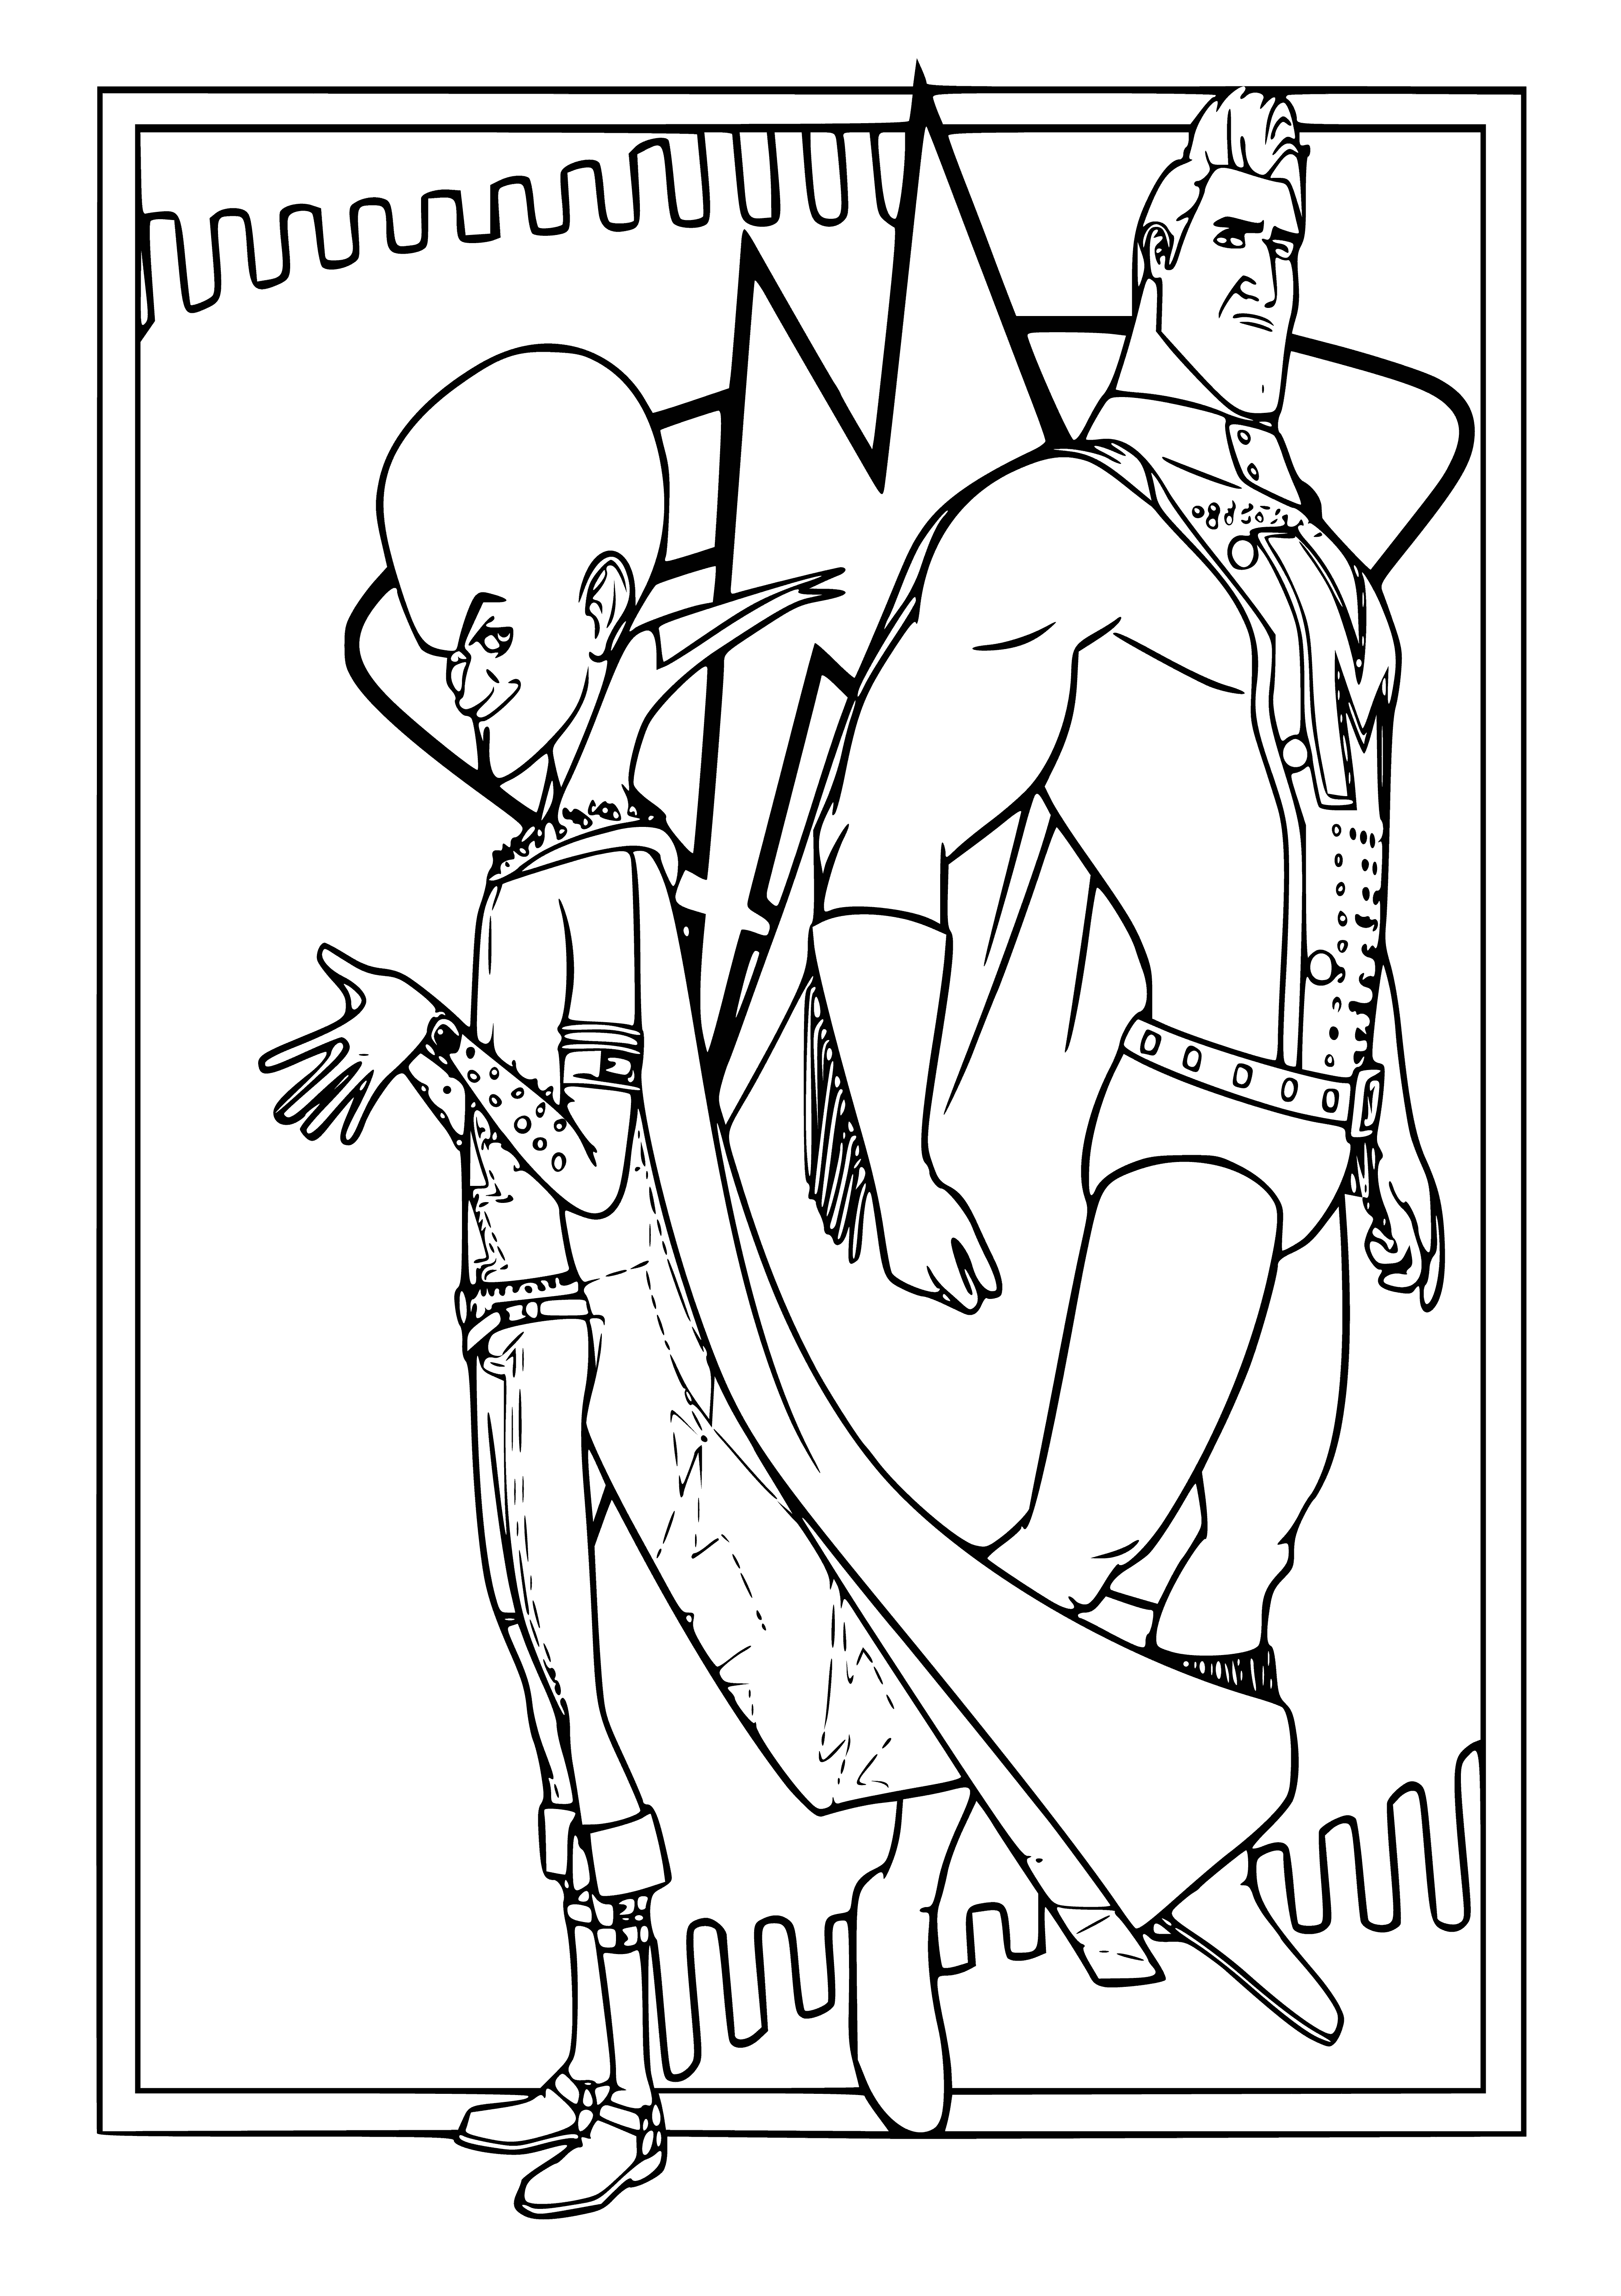 coloring page: Megamind & Metroman coloring page: Two figures, Megamind (large blue humanoid) & Metroman (red cape, blue suit). Wearing black cape, striped shirt, pants, shoes & gold-buckled belt. #Coloring #Fun